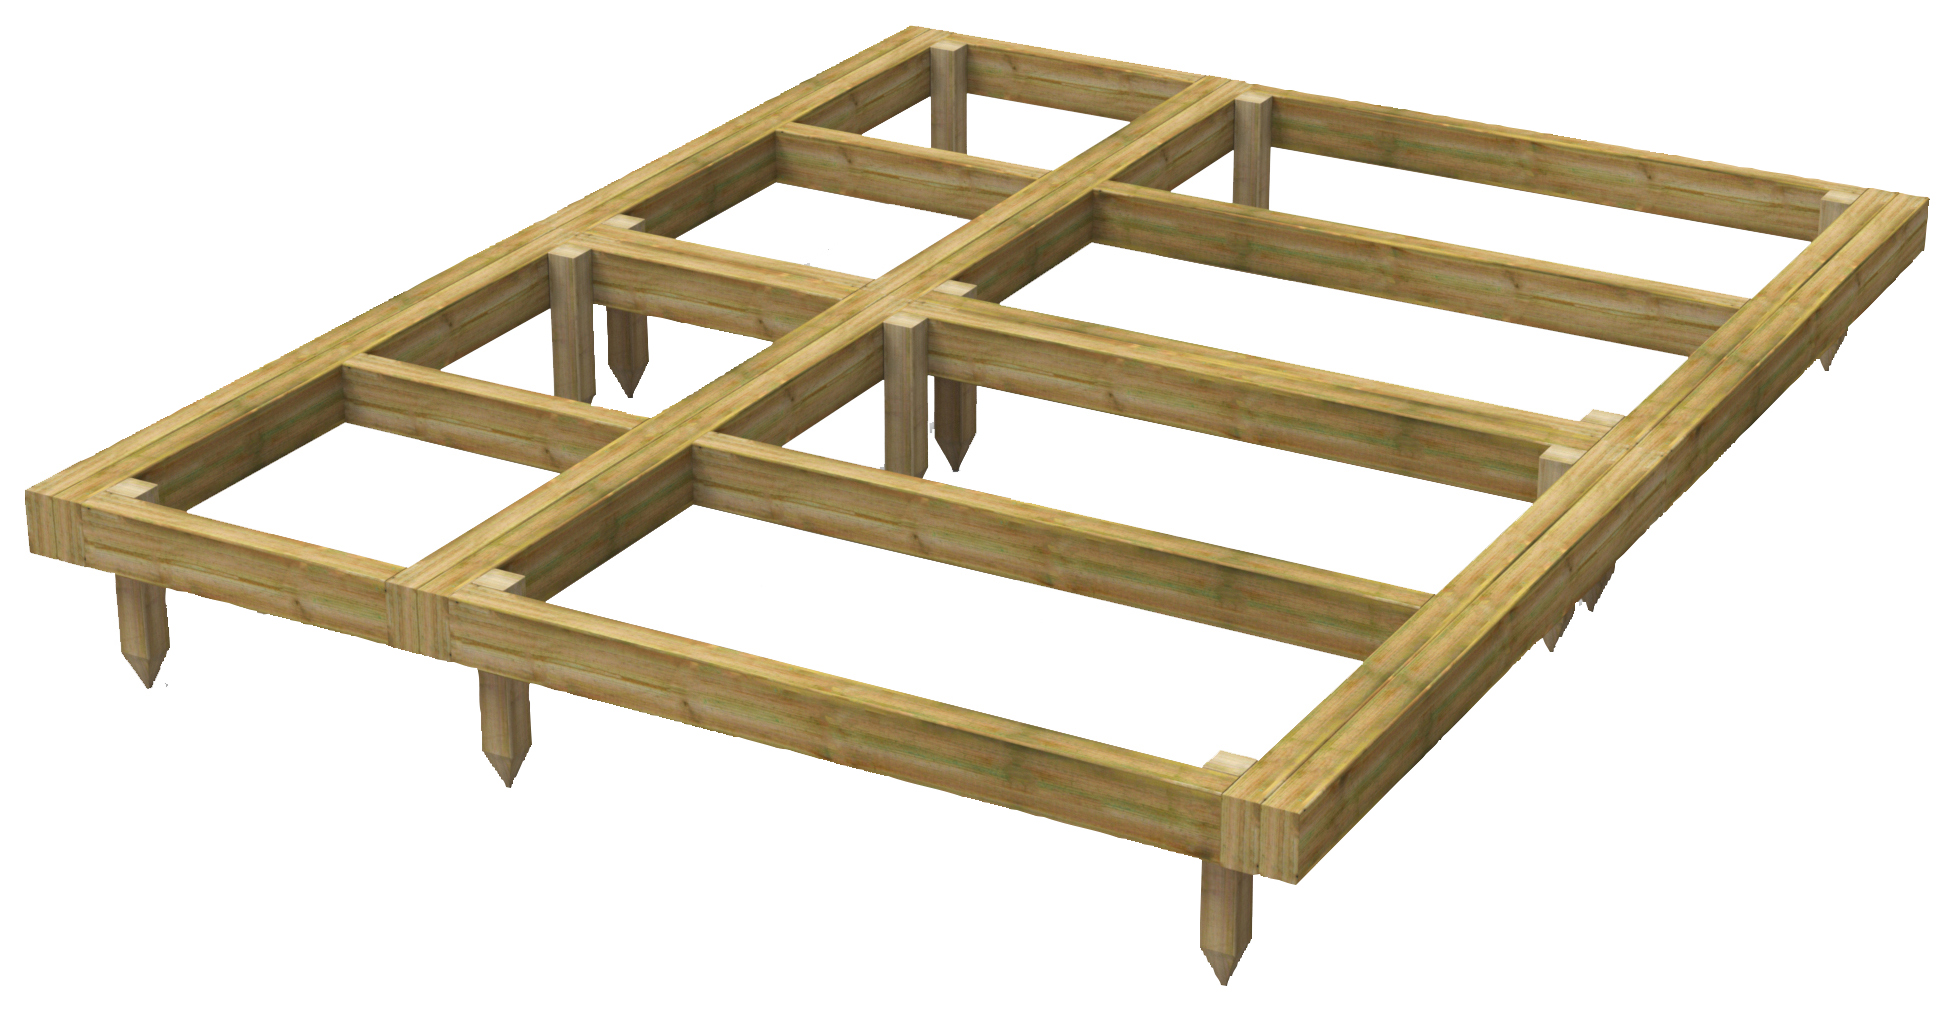 Image of Power Sheds 6 x 8ft Pressure Treated Garden Building Base Kit